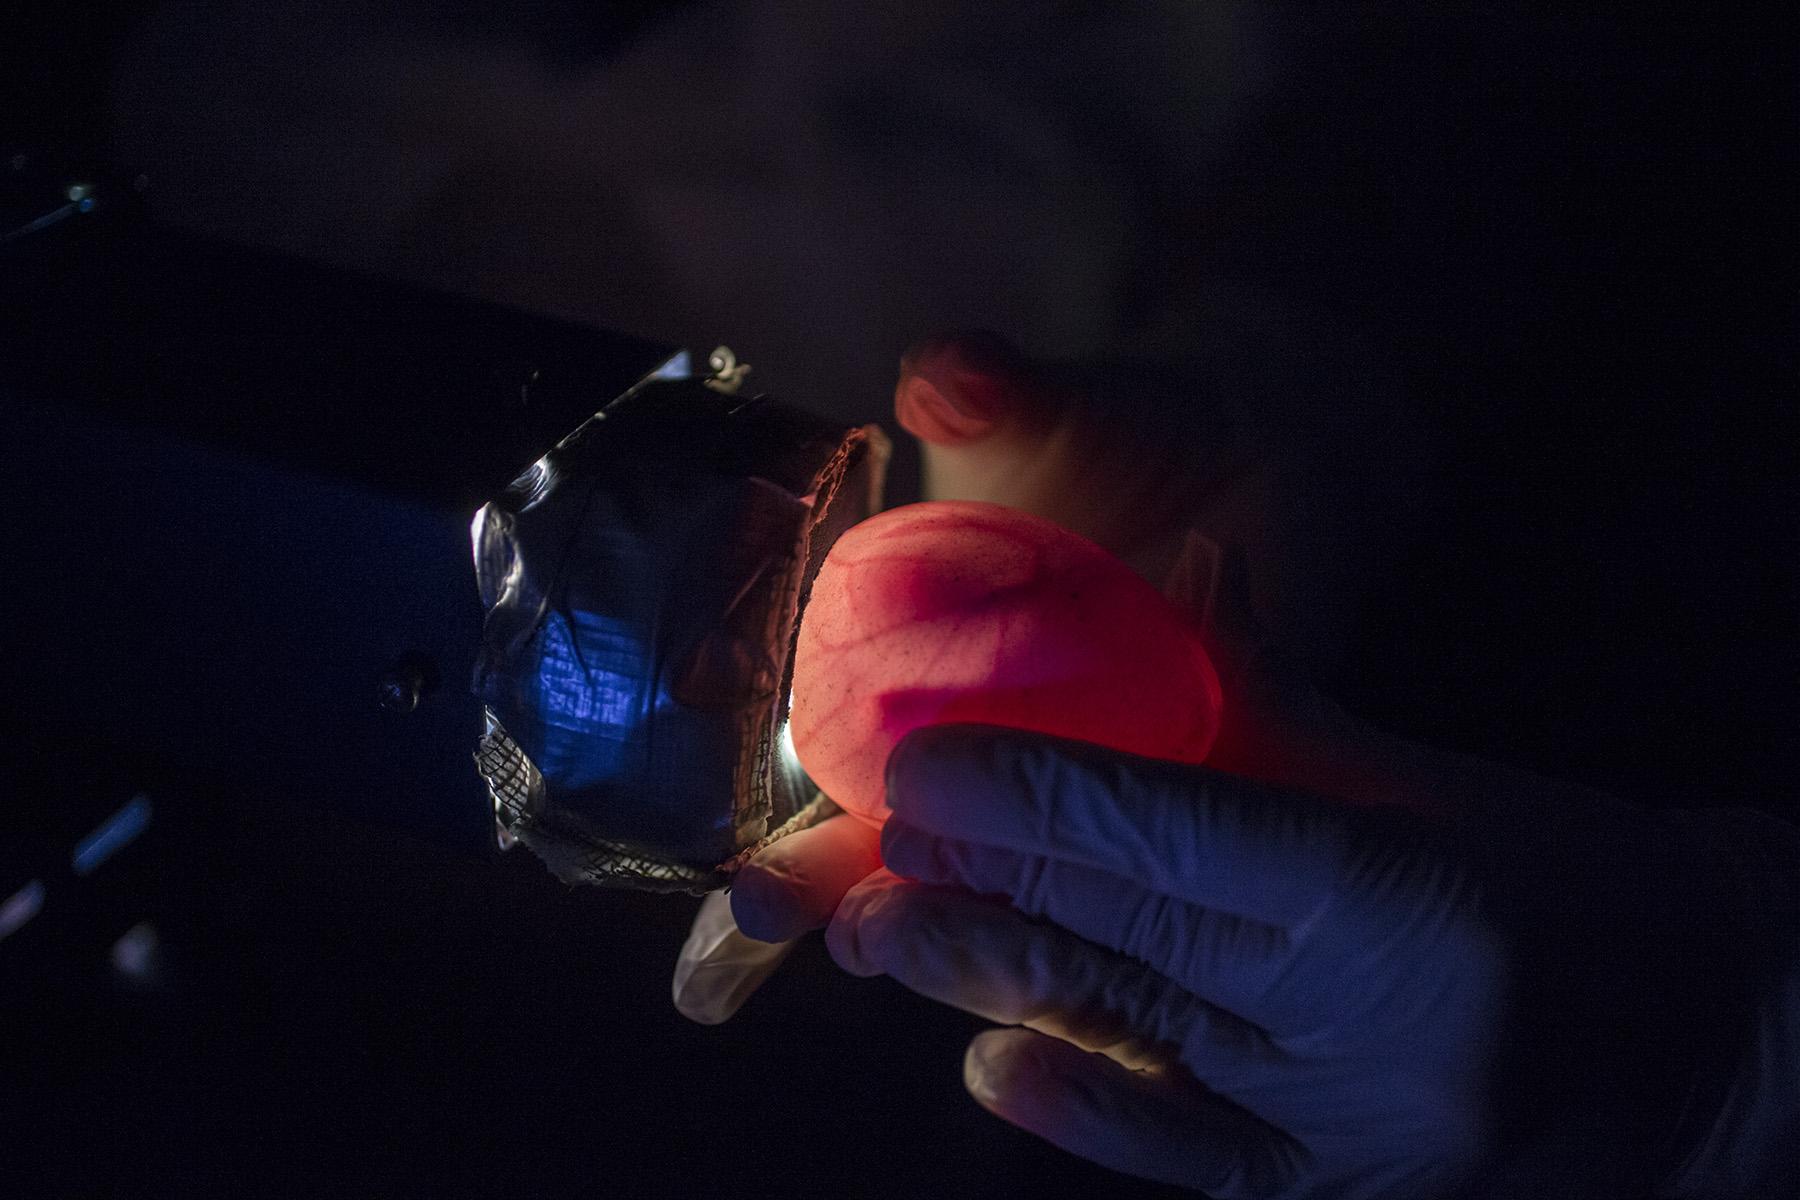 A Shedd Aquarium specialist uses a strong light to observe inside the penguin egg and monitor the chick's growth as part of a process known as candling. (Courtesy Shedd Aquarium)